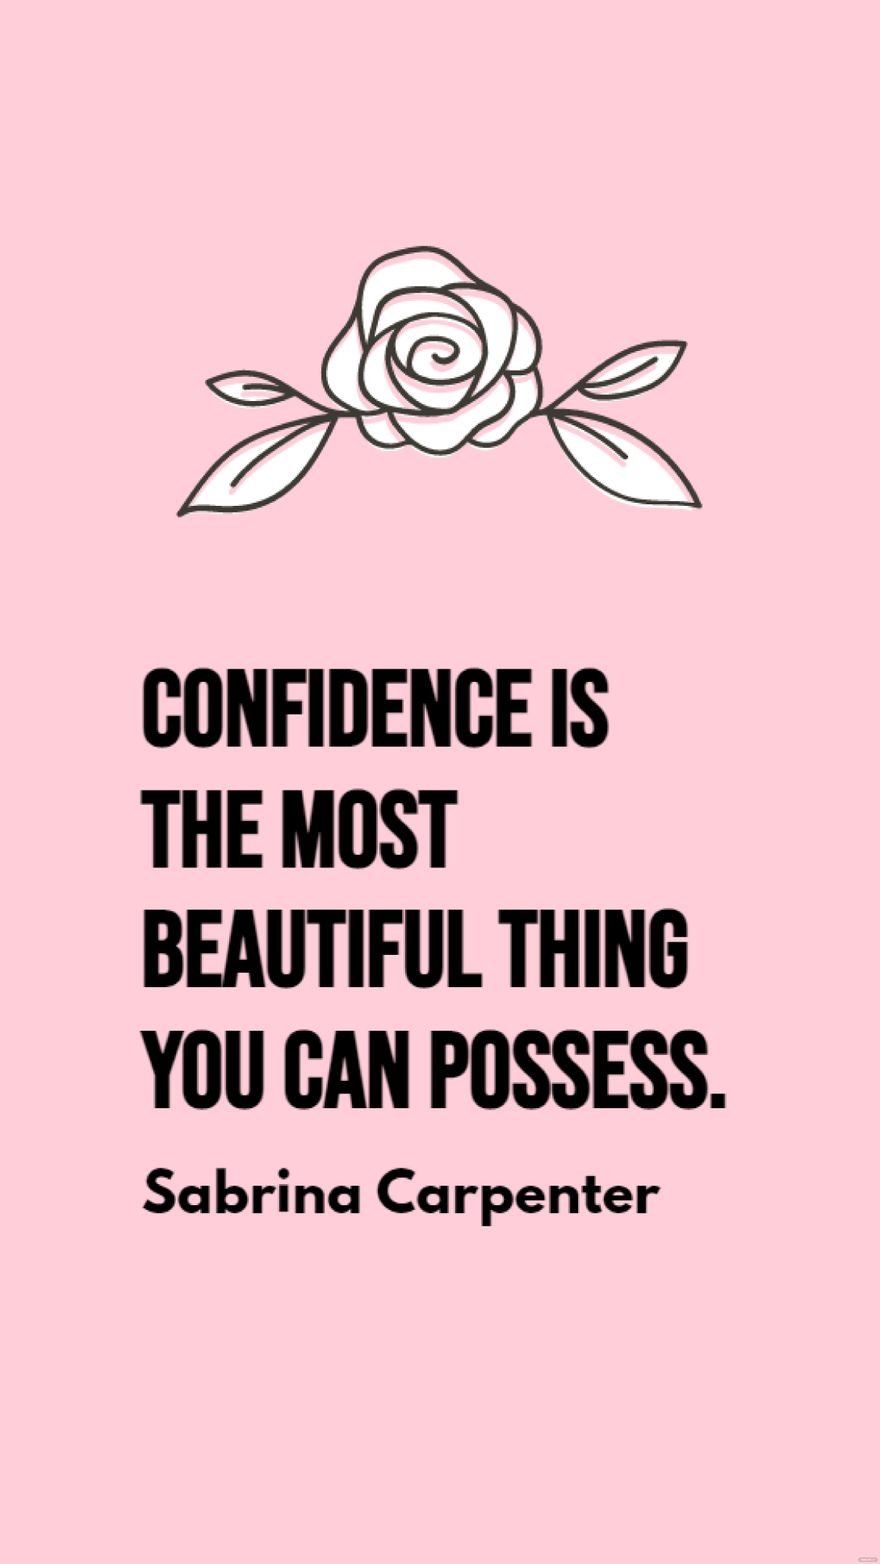 Sabrina Carpenter - Confidence is the most beautiful thing you can possess. in JPG